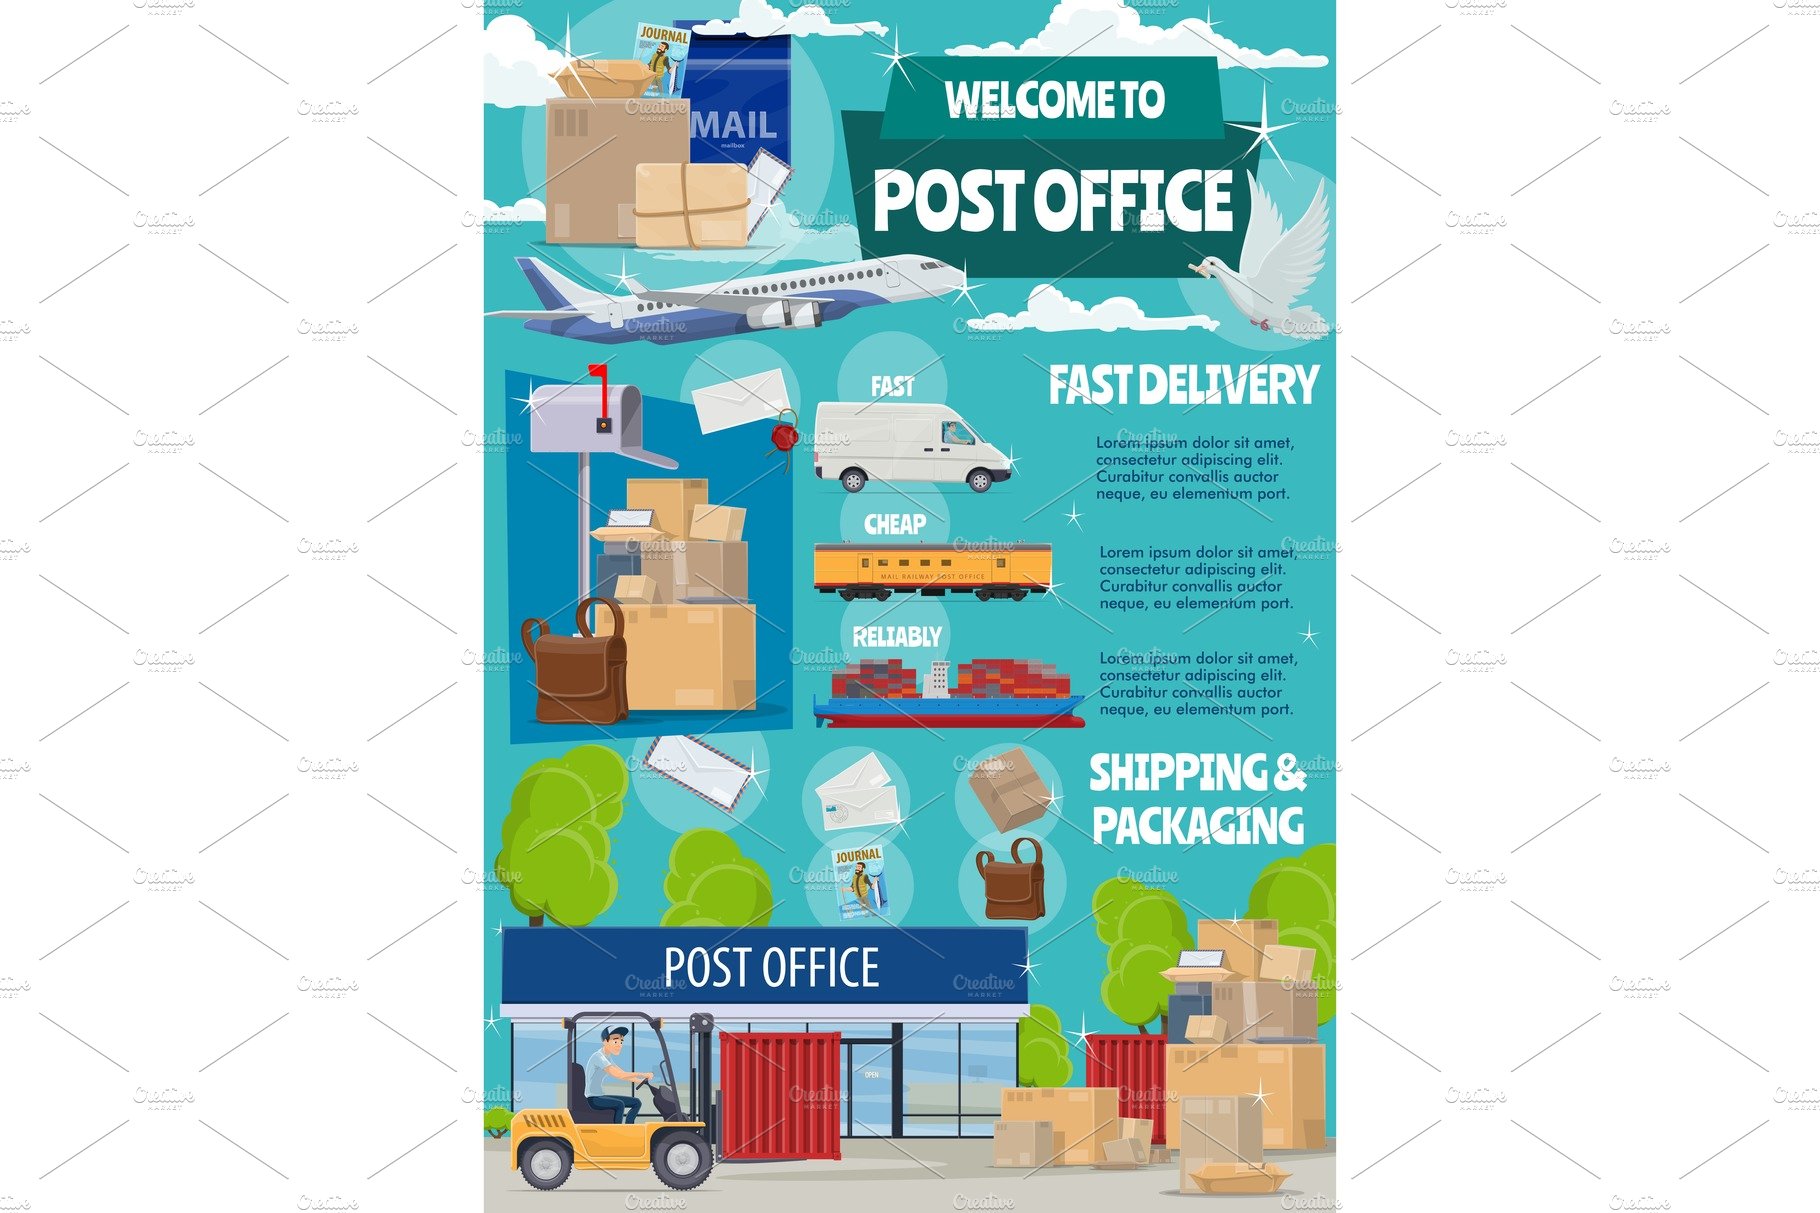 Post office, mail transportation cover image.